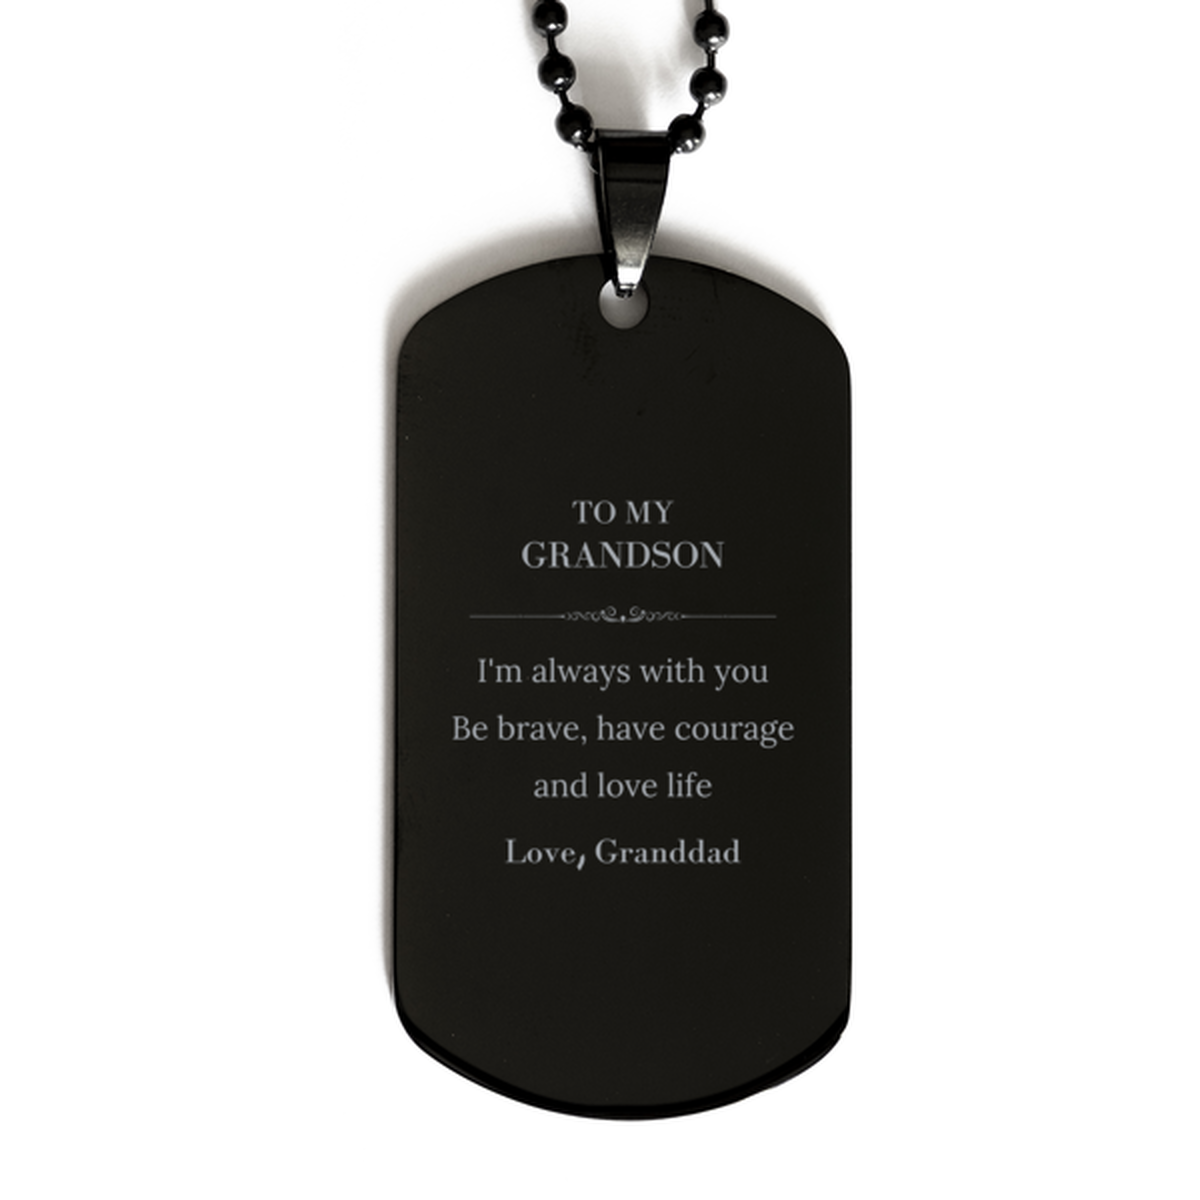 To My Grandson Gifts from Granddad, Unique Black Dog Tag Inspirational Christmas Birthday Graduation Gifts for Grandson I'm always with you. Be brave, have courage and love life. Love, Granddad